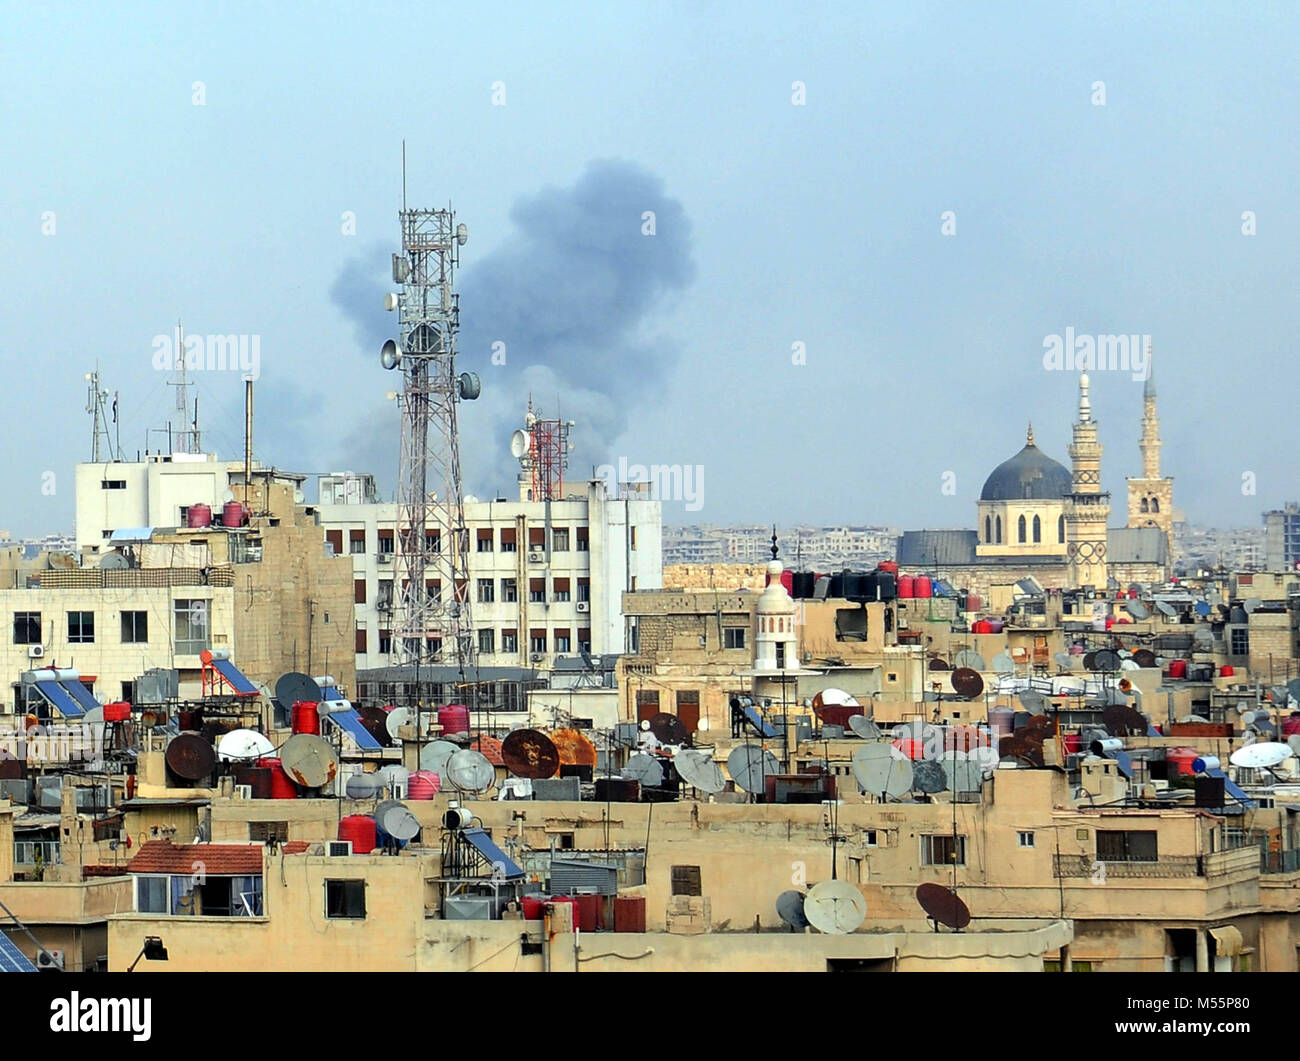 Damascus. 20th Feb, 2018. Smoke is seen in some areas in Damascus, capital of Syria, on Feb.20, 2018. Tens of people have been taken to the hospitals Tuesday due to the intensified rebels' mortar attack that targeted several parts of Damascus as part of an onging military showdown between the rebels and the government forces. Credit: Ammar Safarjalani/Xinhua/Alamy Live News Stock Photo